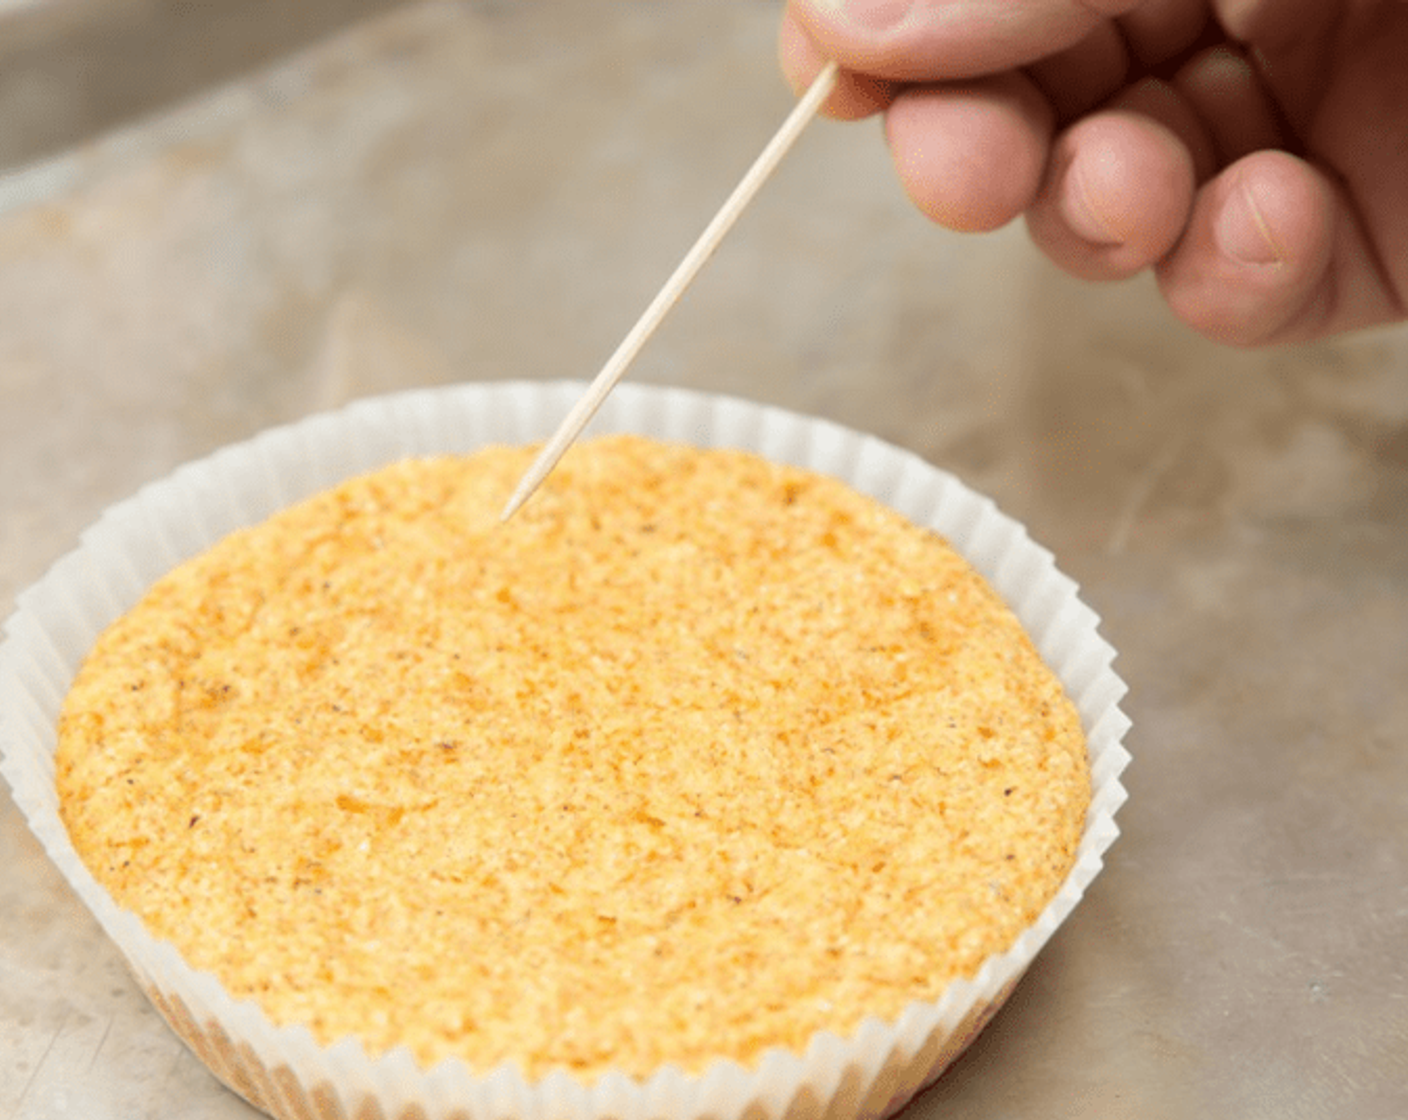 step 10 Place muffin baking cup included in your PeachDish box in a heavy baking pan. Fill with cornbread batter. Bake 15-20 minutes, or until golden brown on top and a toothpick inserted in the center comes out clean.